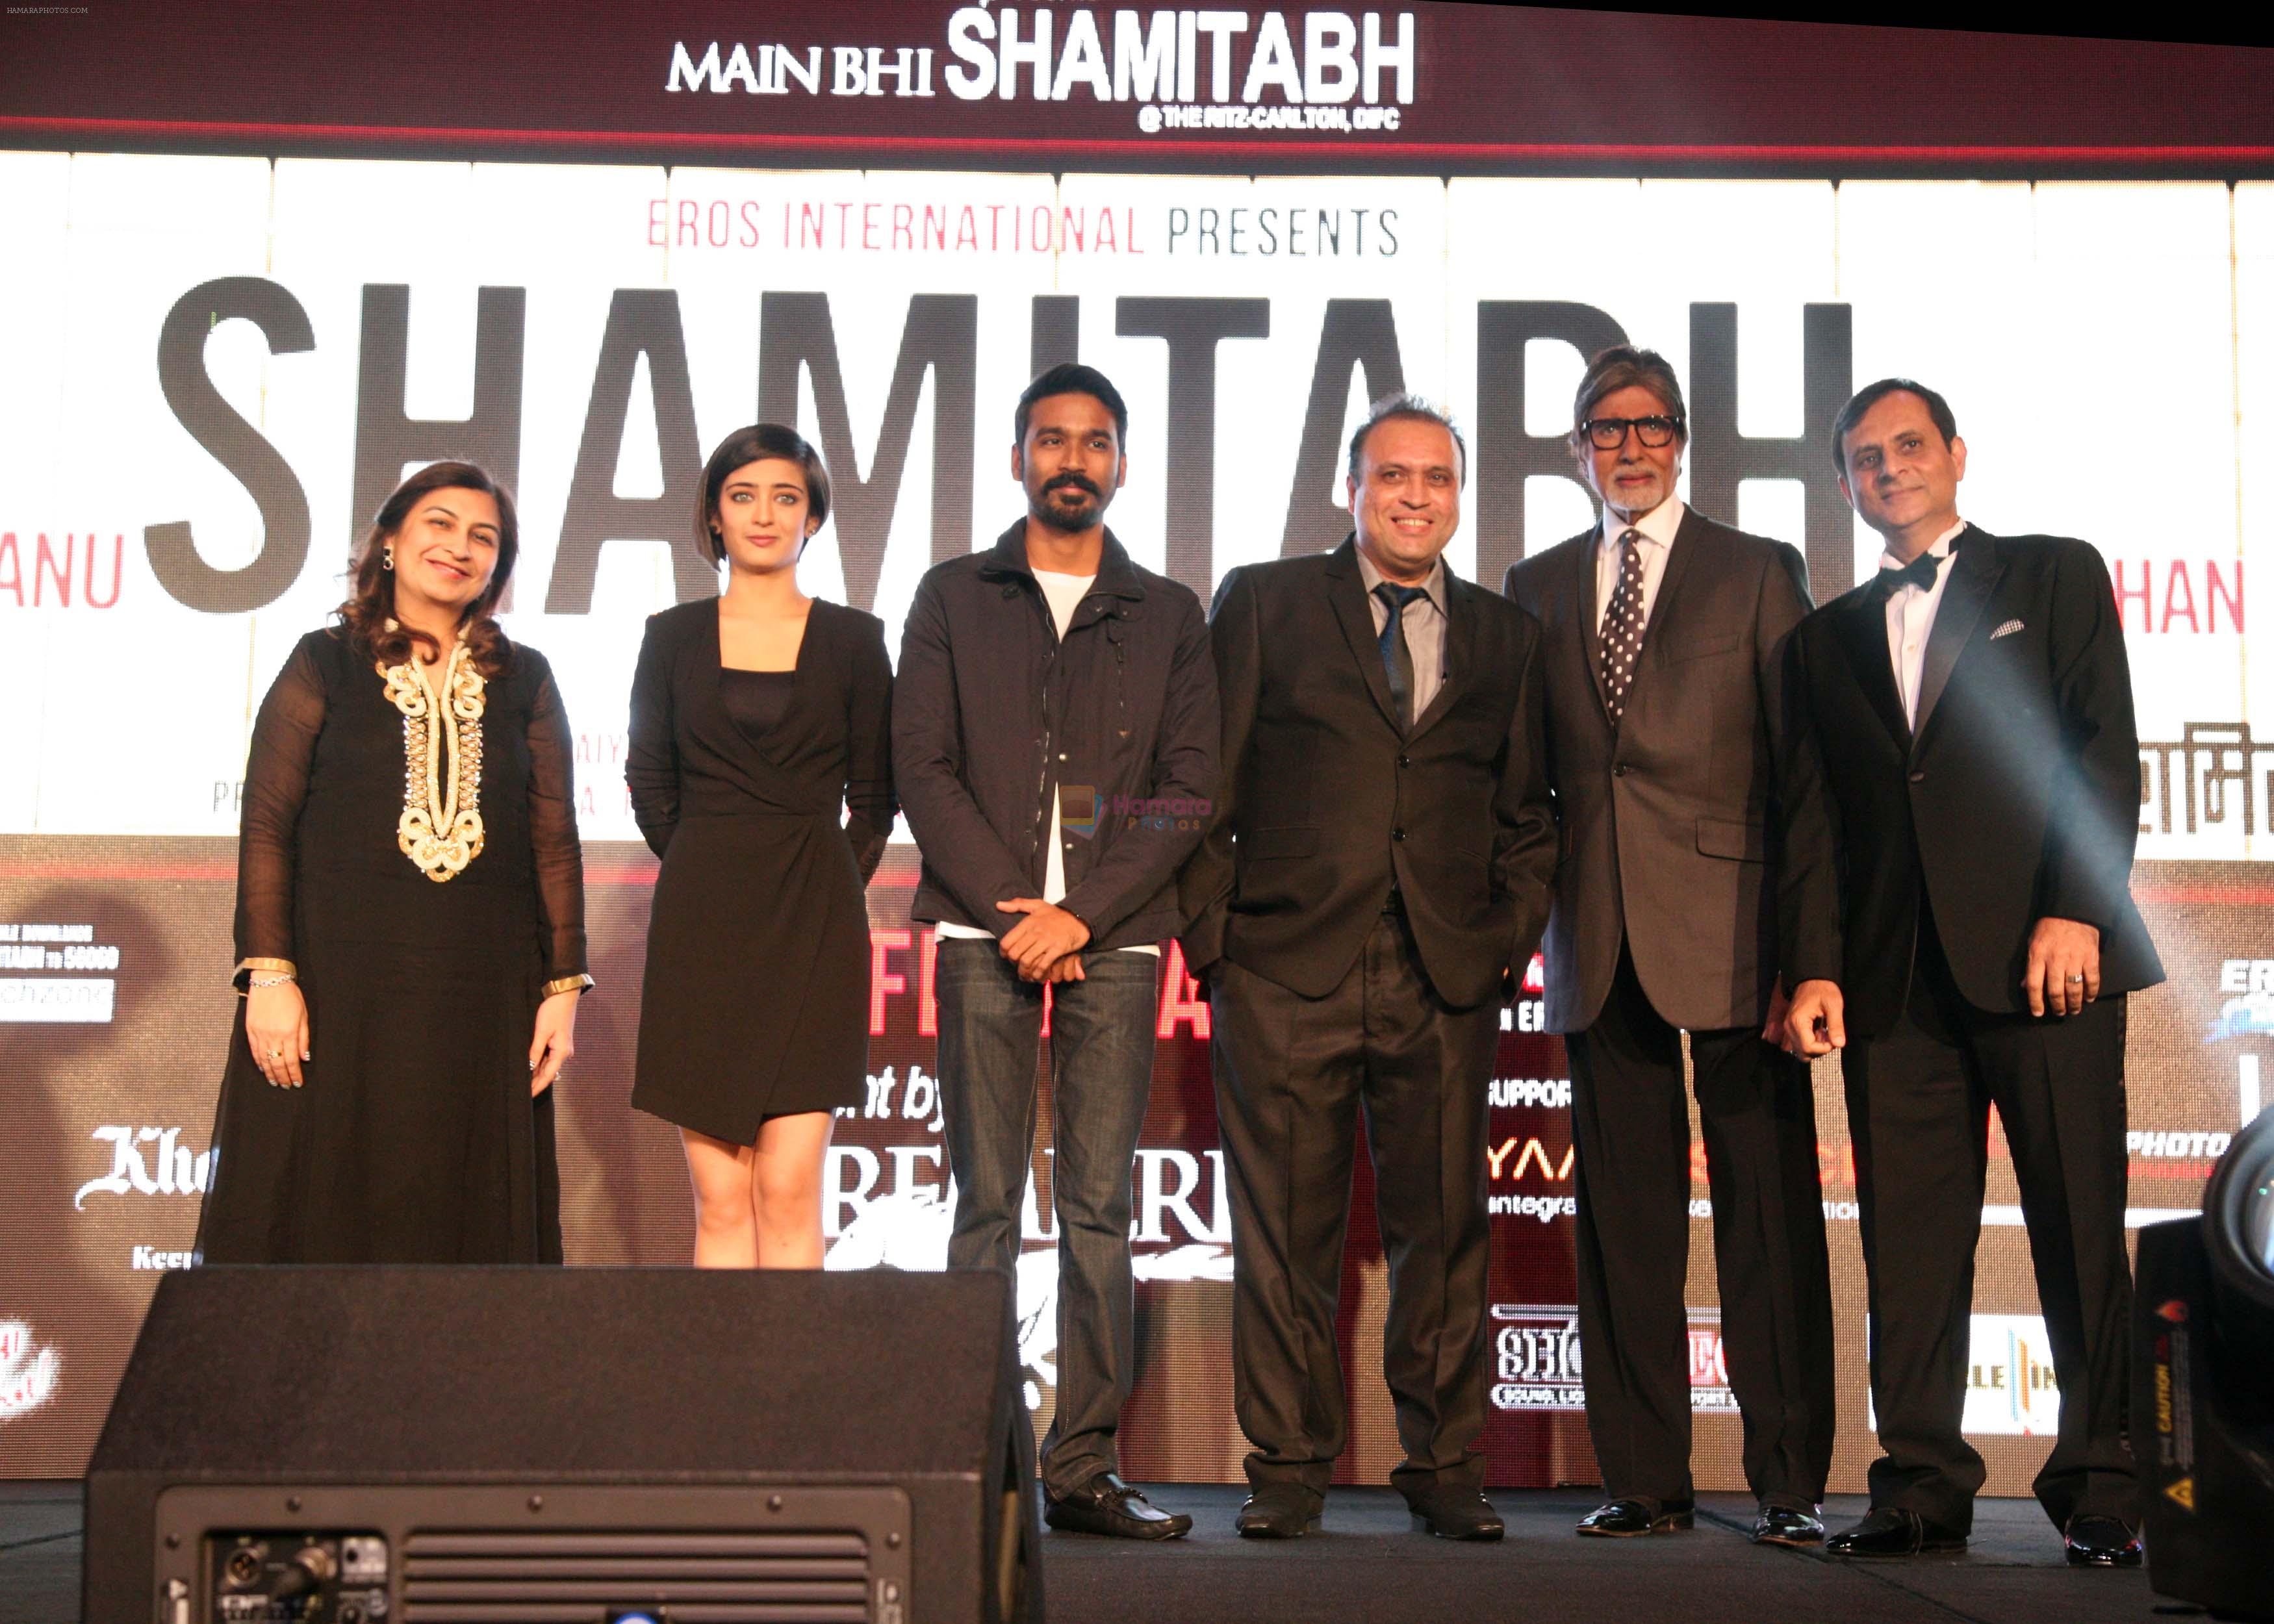 Amitabh Bachchan, Dhanush, Akshara at the Premiere Production house, headed by Mr. Javed Shafi hosted a perfect evening to Shamitabh in the UAE on 29th Jan 20